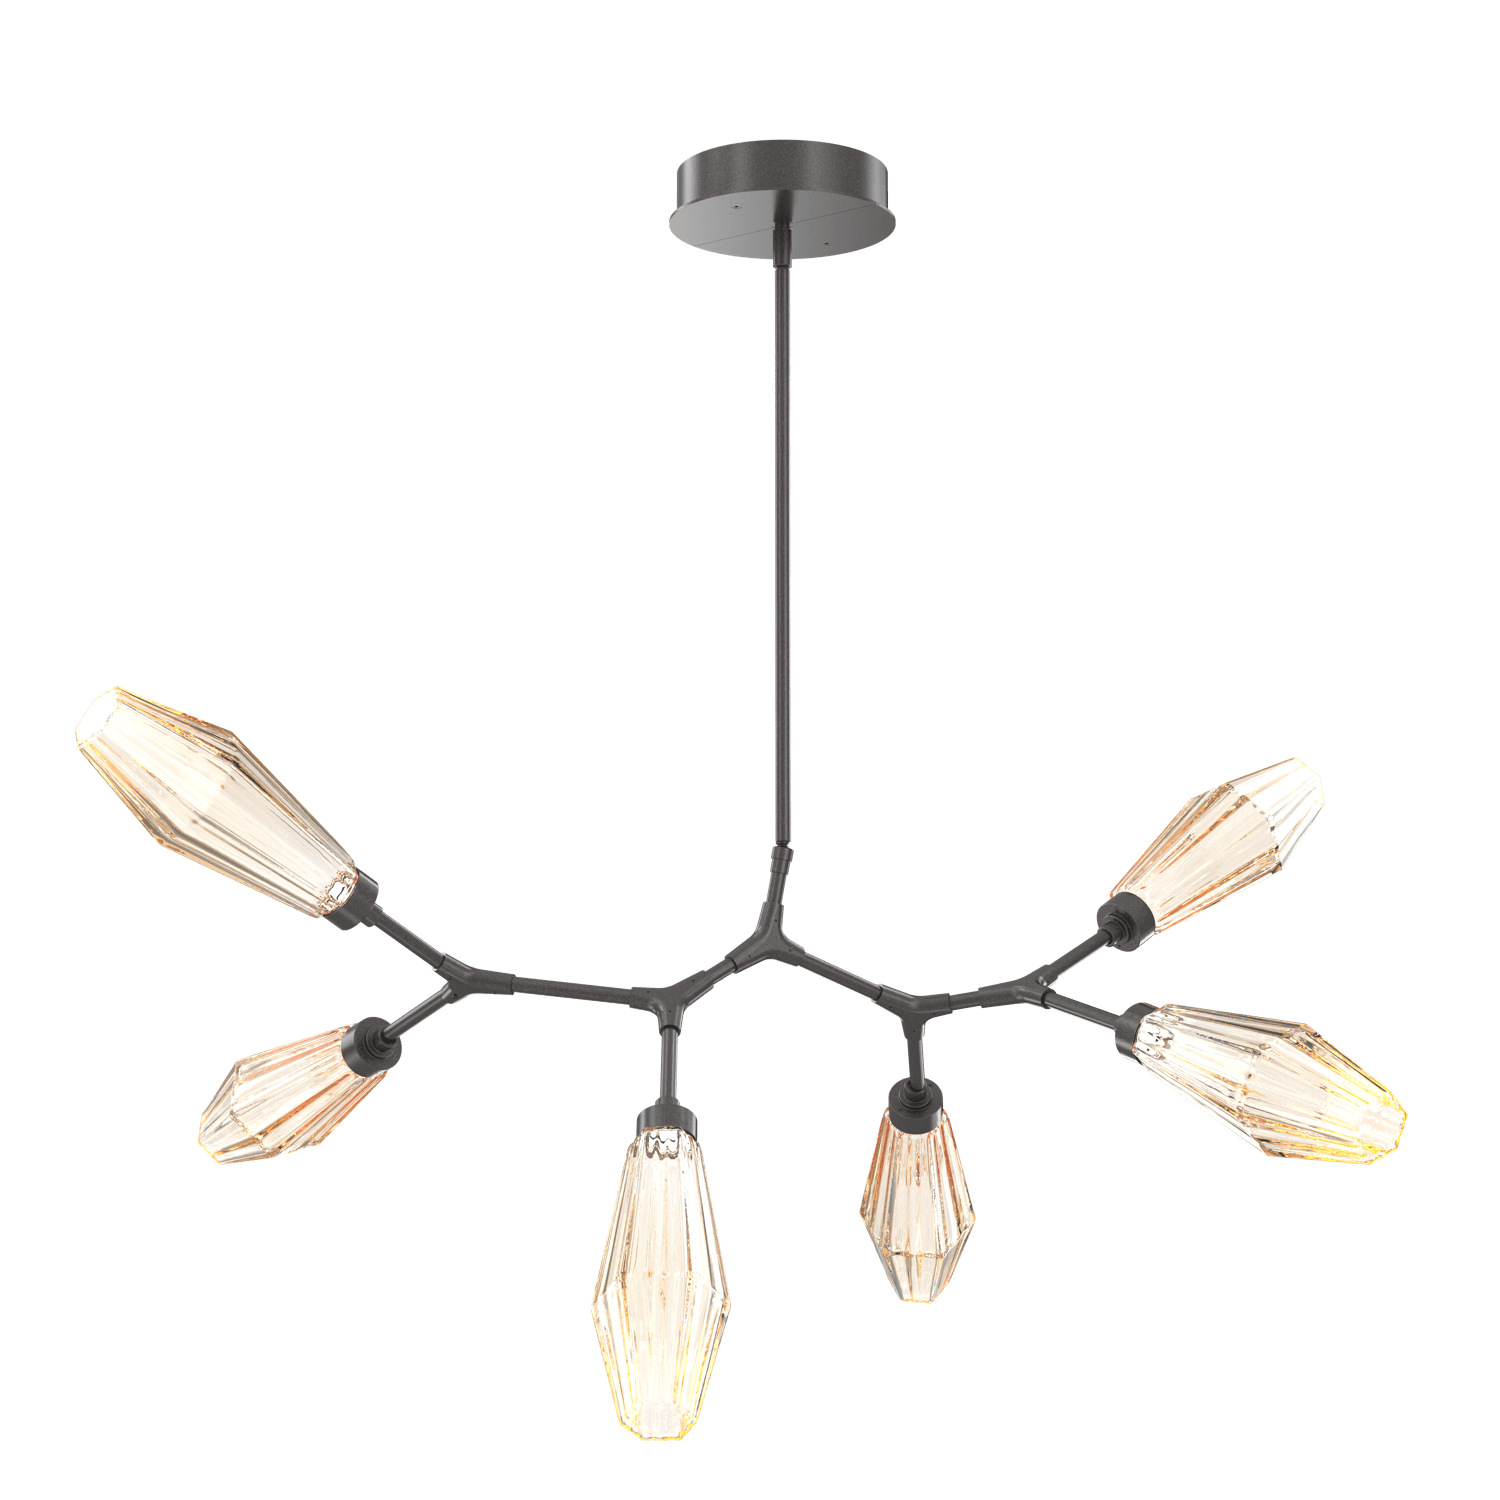 PLB0049-BA-GP-RA-Hammerton-Studio-Aalto-6-light-modern-branch-chandelier-with-graphite-finish-and-optic-ribbed-amber-glass-shades-and-LED-lamping